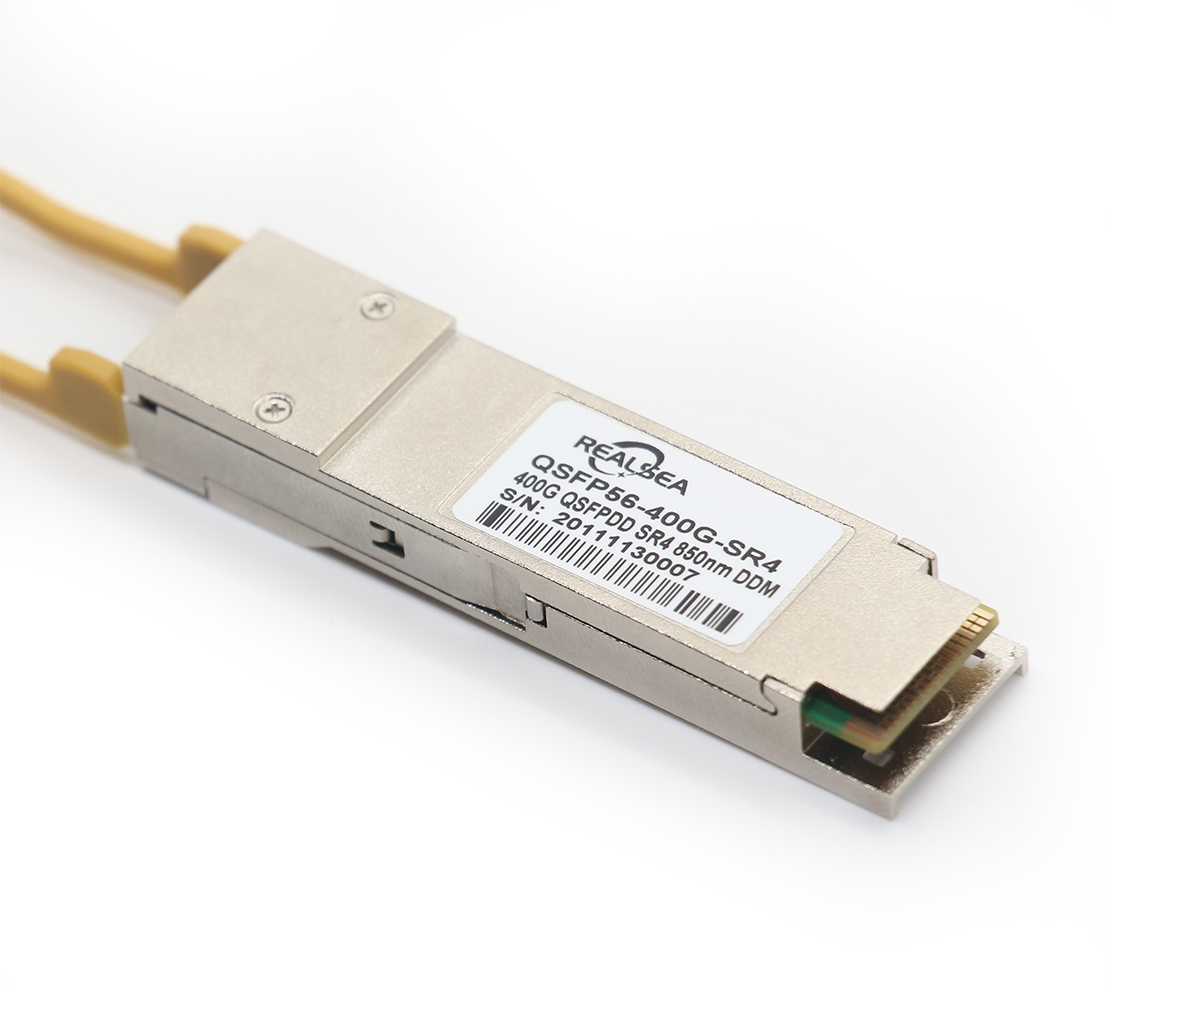 The difference between 10 Gigabit optical modules and ordinary optical modules.Brocade compatible SFP optical transceiver